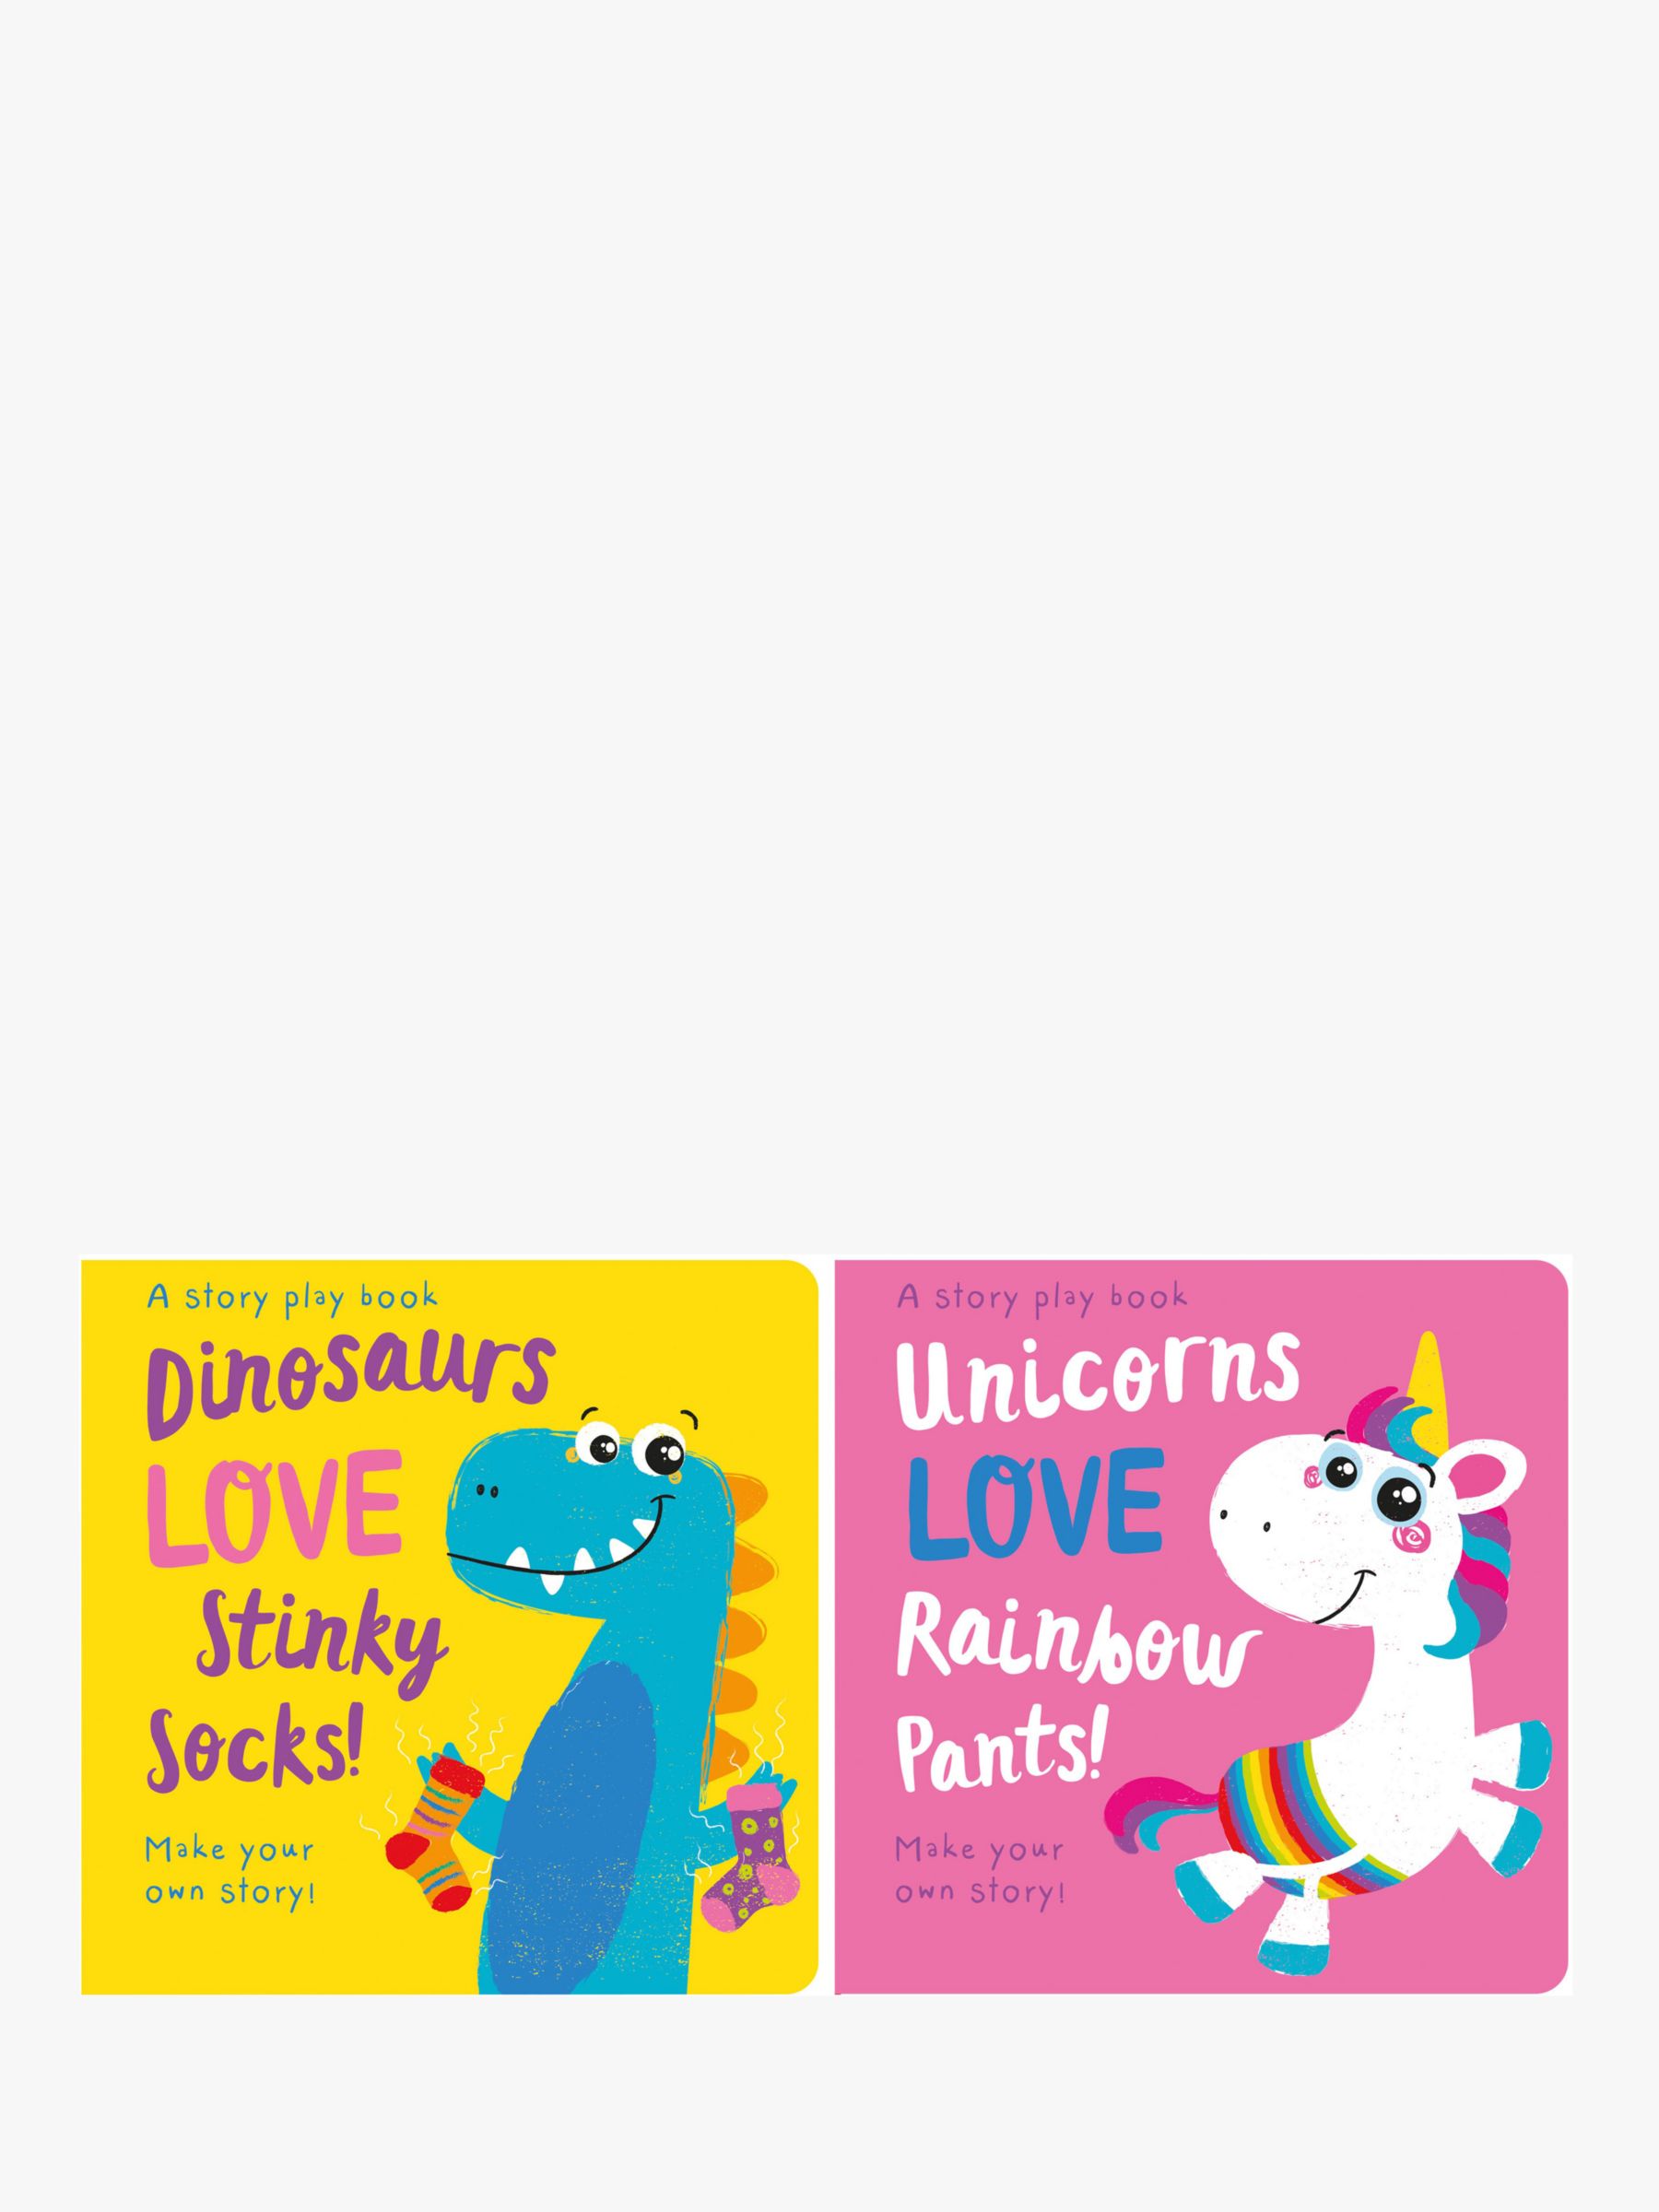 Make Your Own Story Dinosaurs Love Stinky Socks and Unicorns Love Rainbow Pants Children's Book, Pack of 2